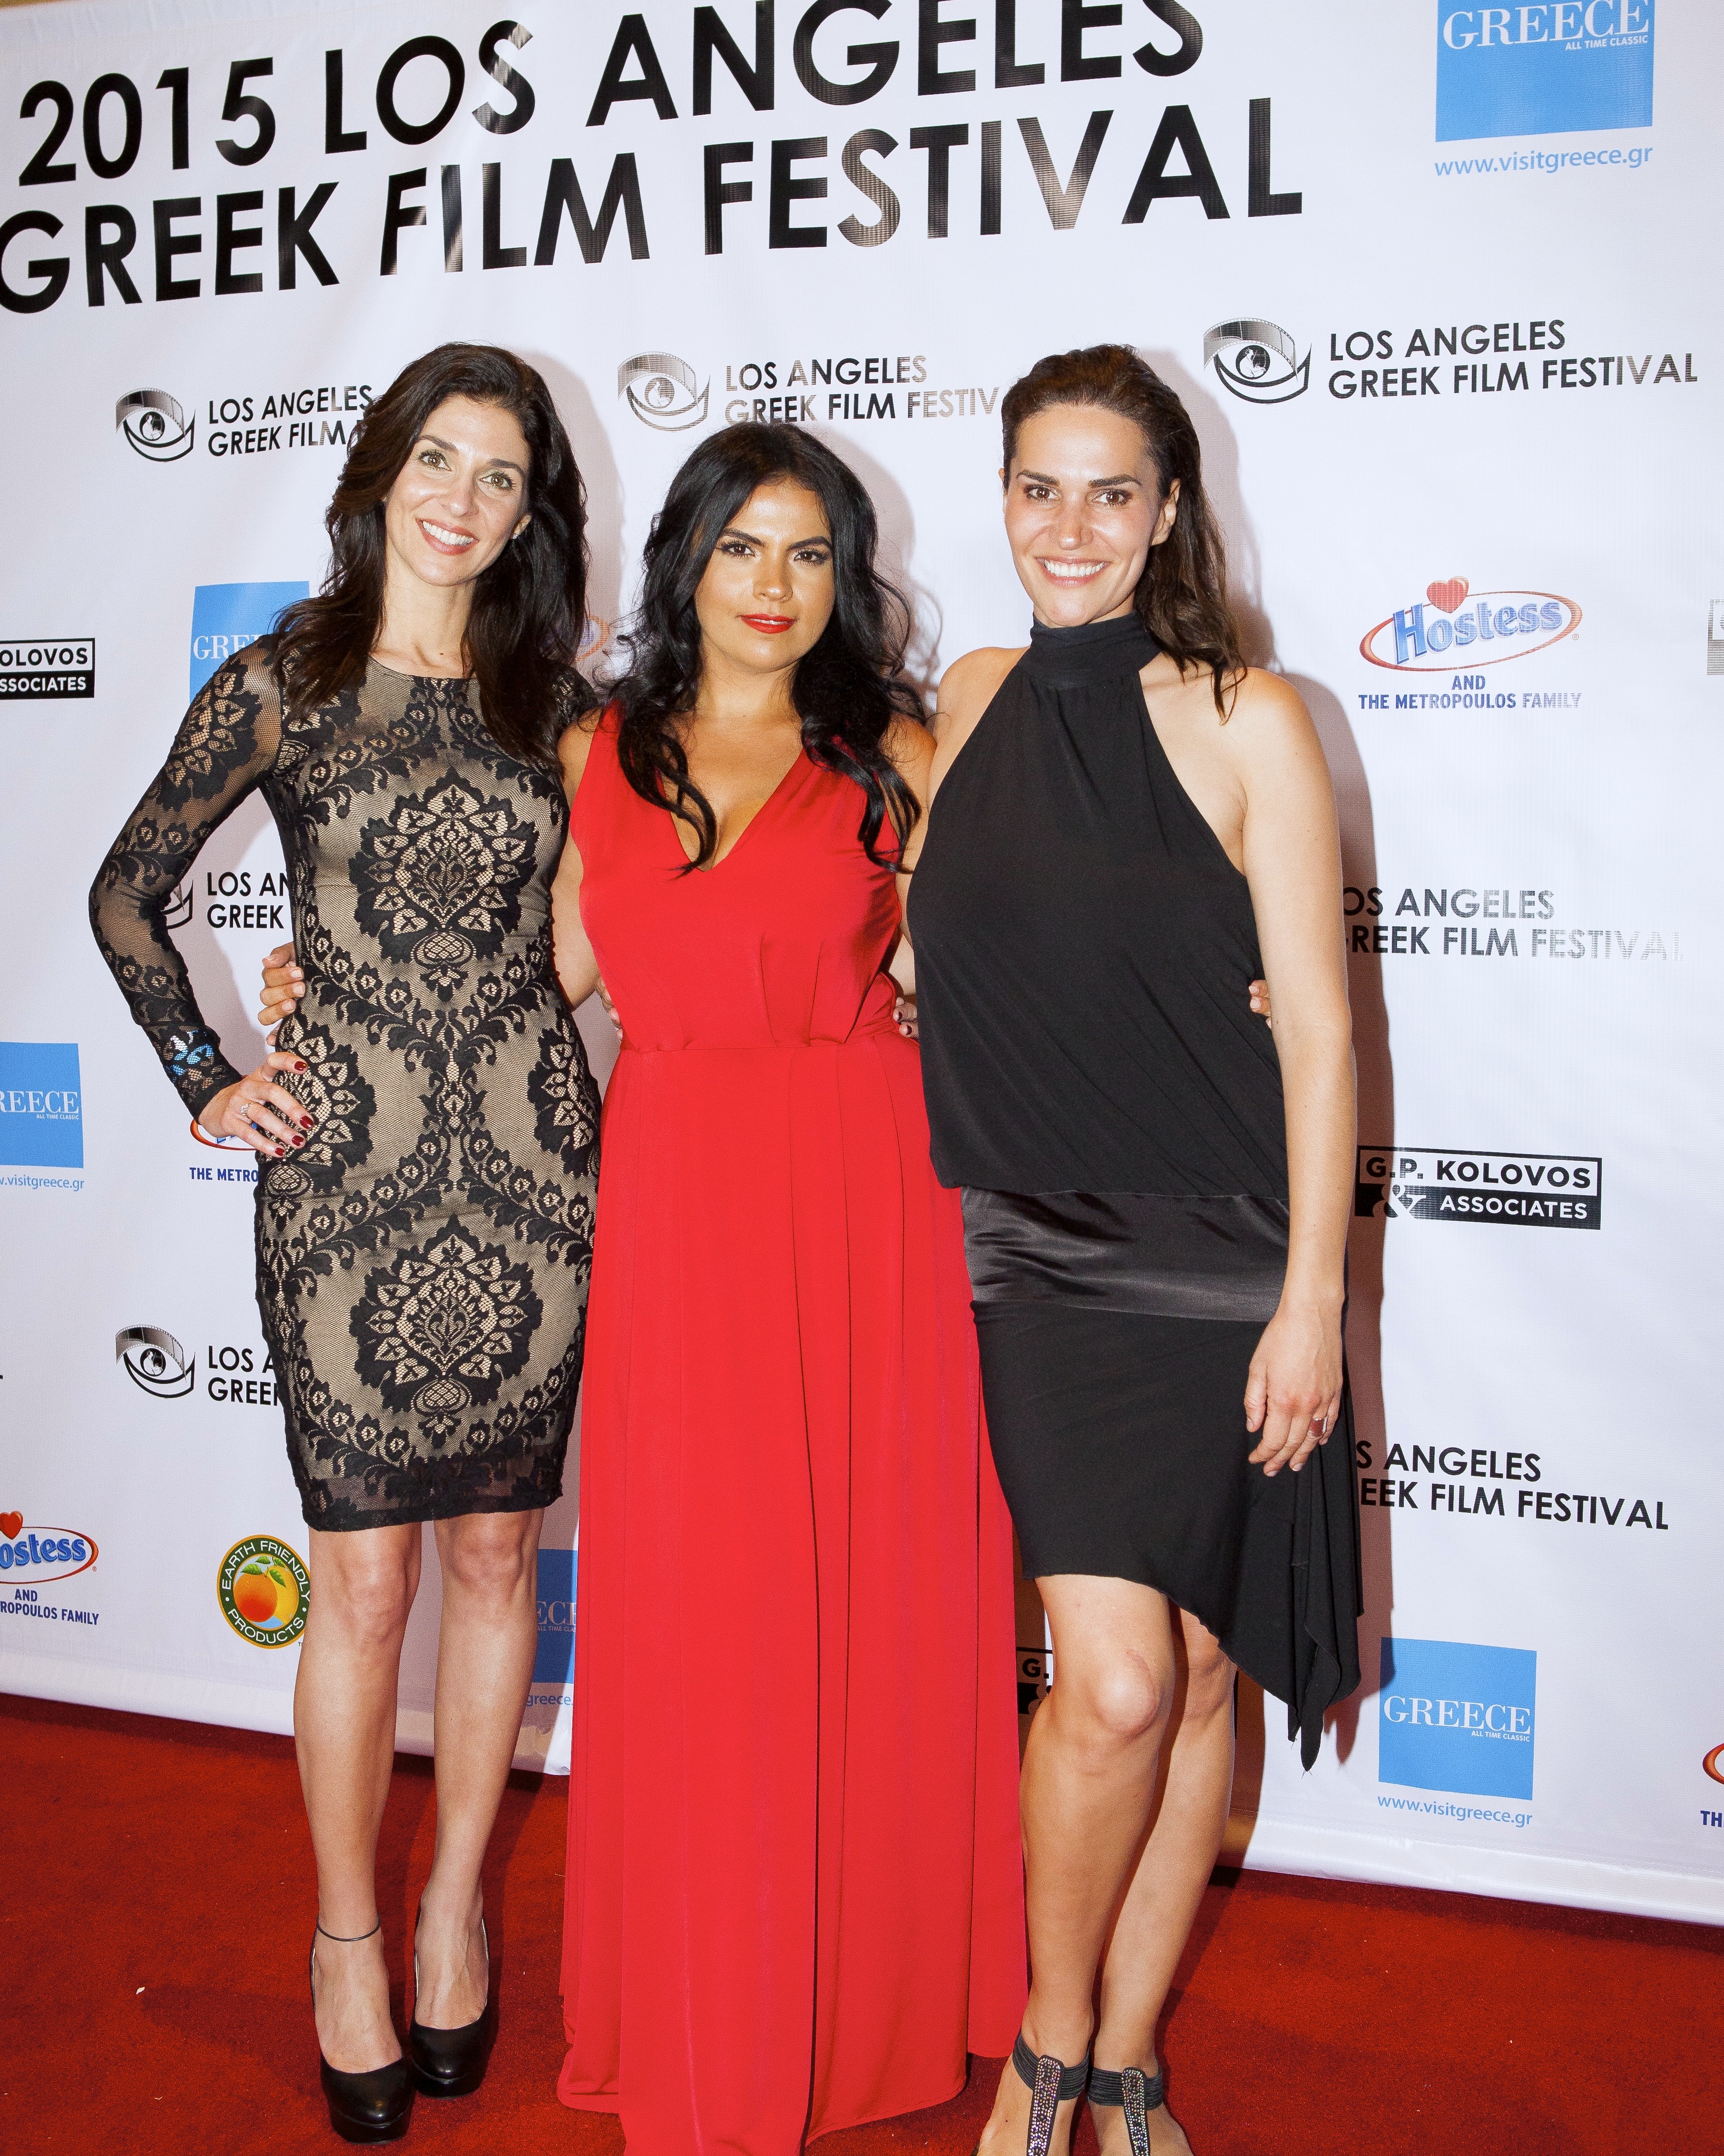 Eftehea Meli, Singer/Song Writer Vassy and Actress/Writer Dimitra Tziova at the 2015 Los Angeles Greek Film Festival